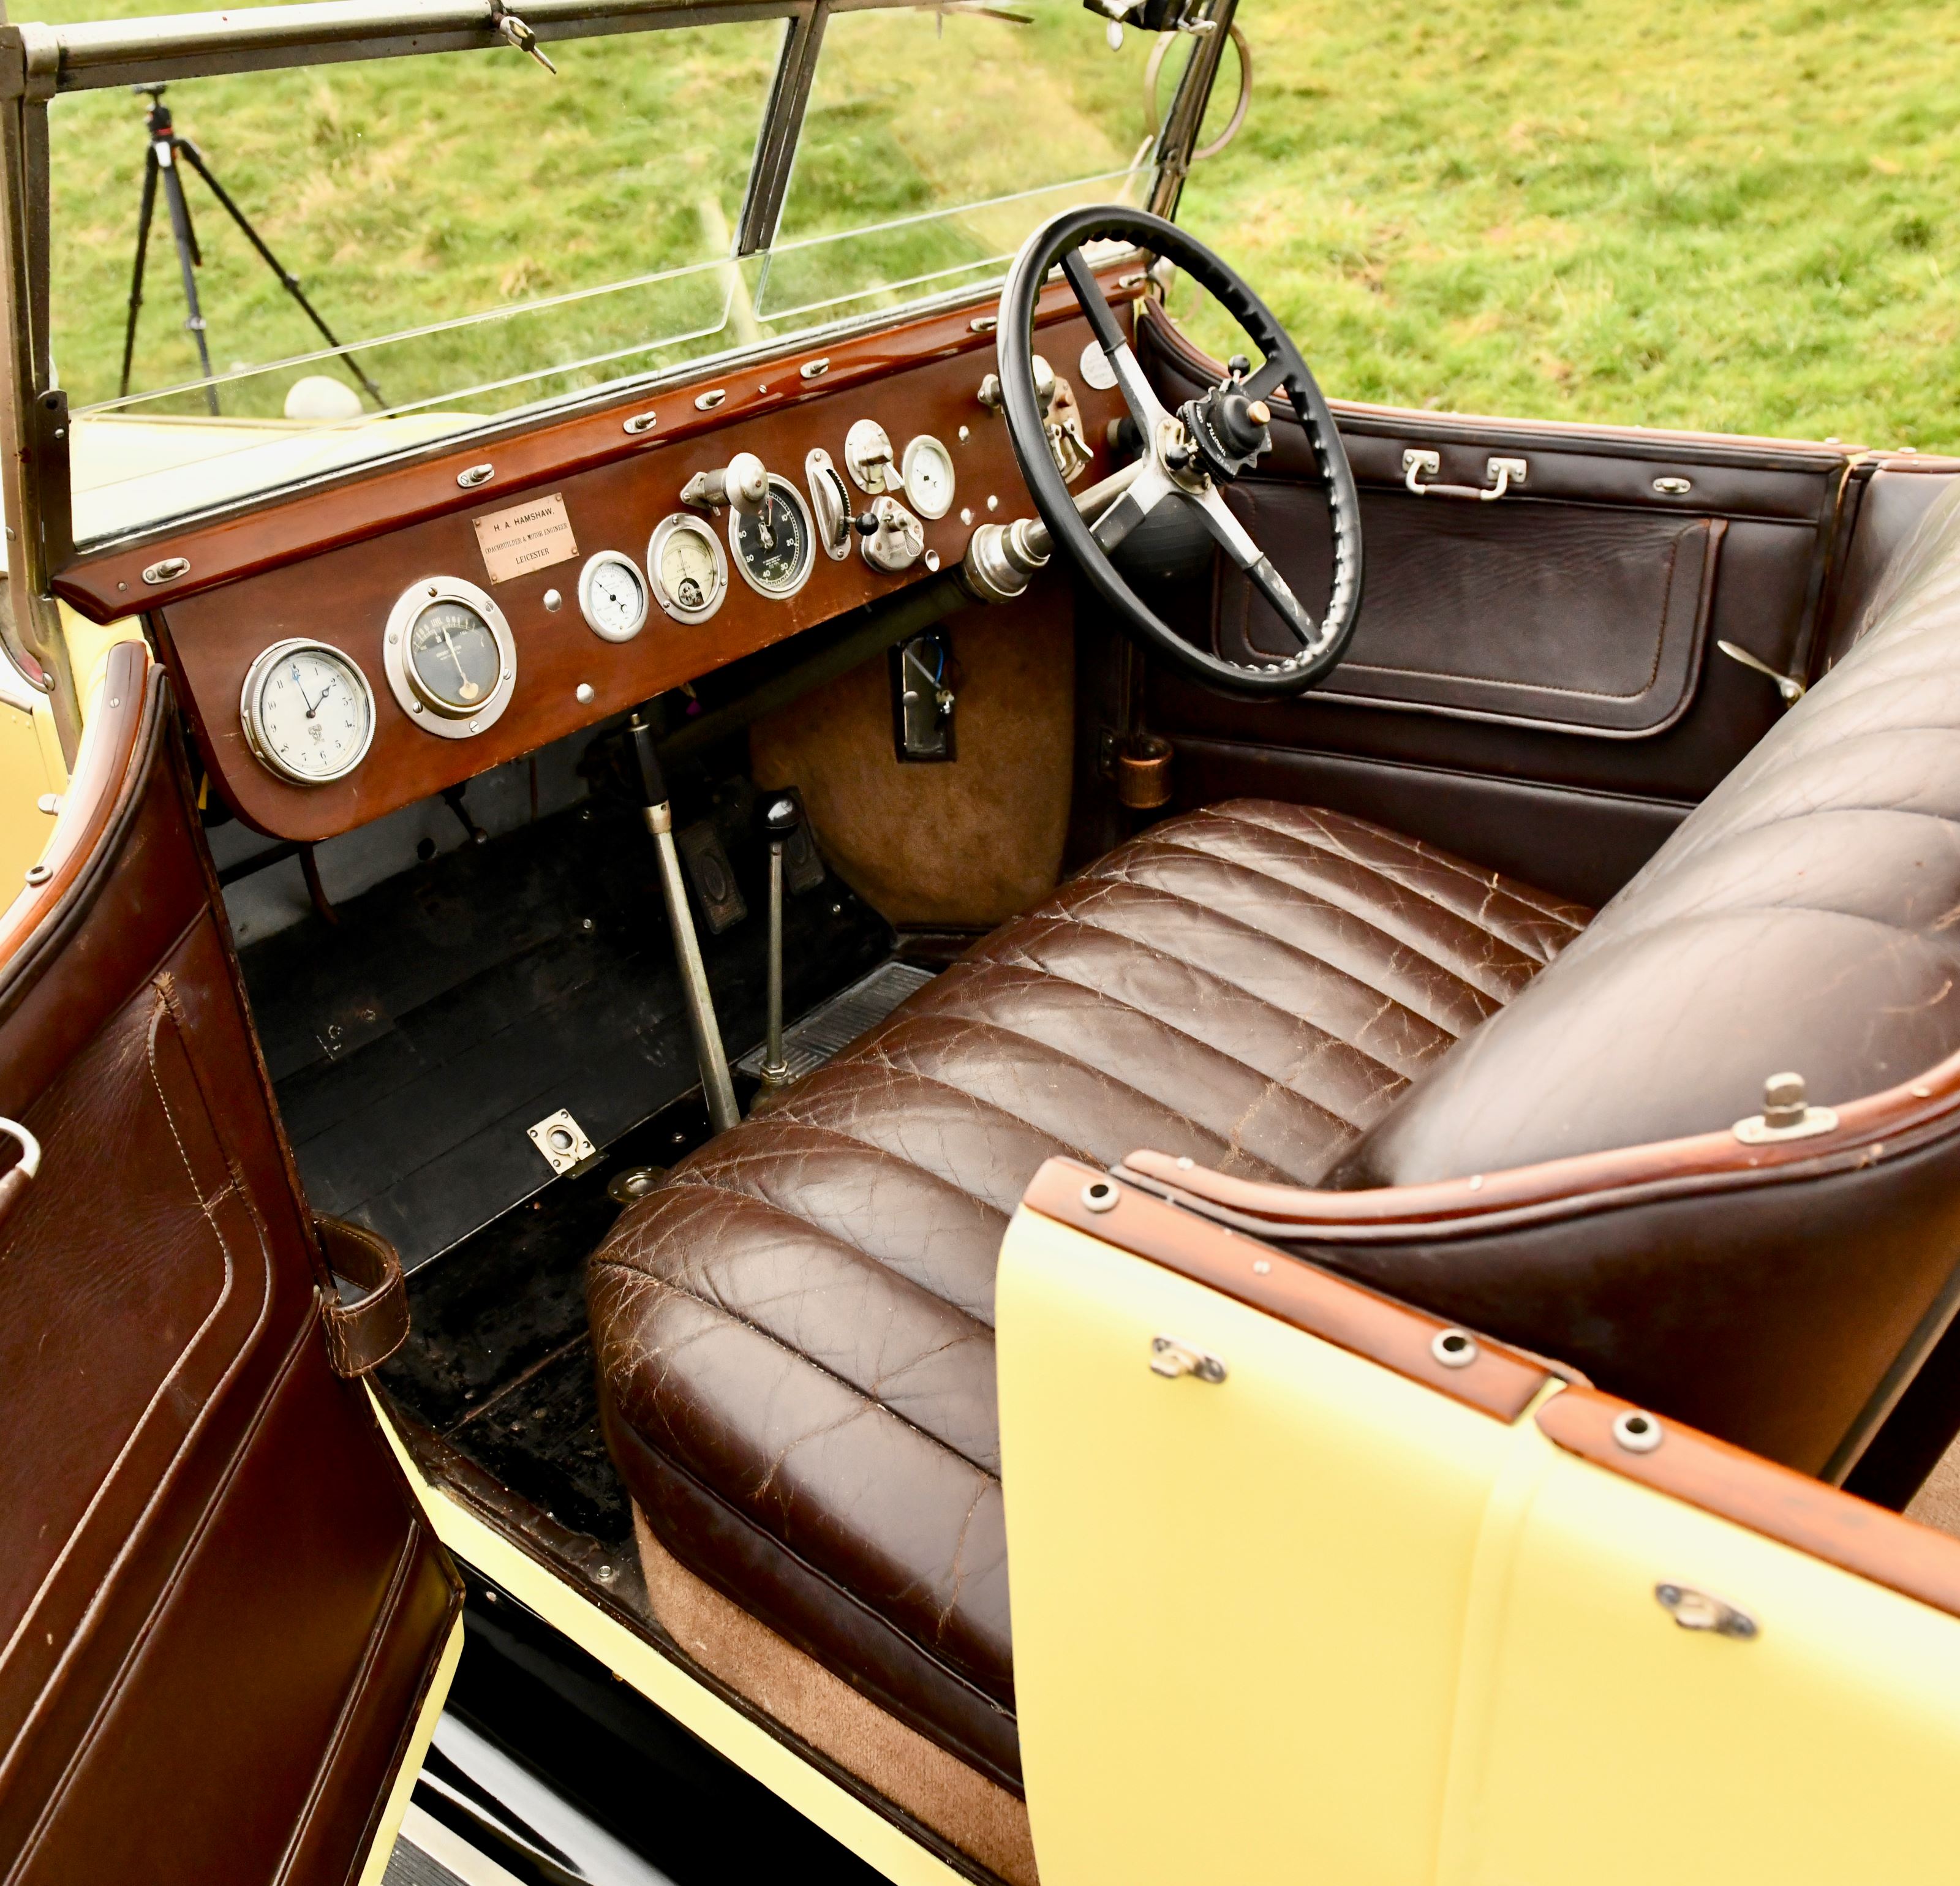 Rolls royce 20hp tourer by hamshaws of leicester 8c9rx rmf6pw0fbsyz2wj